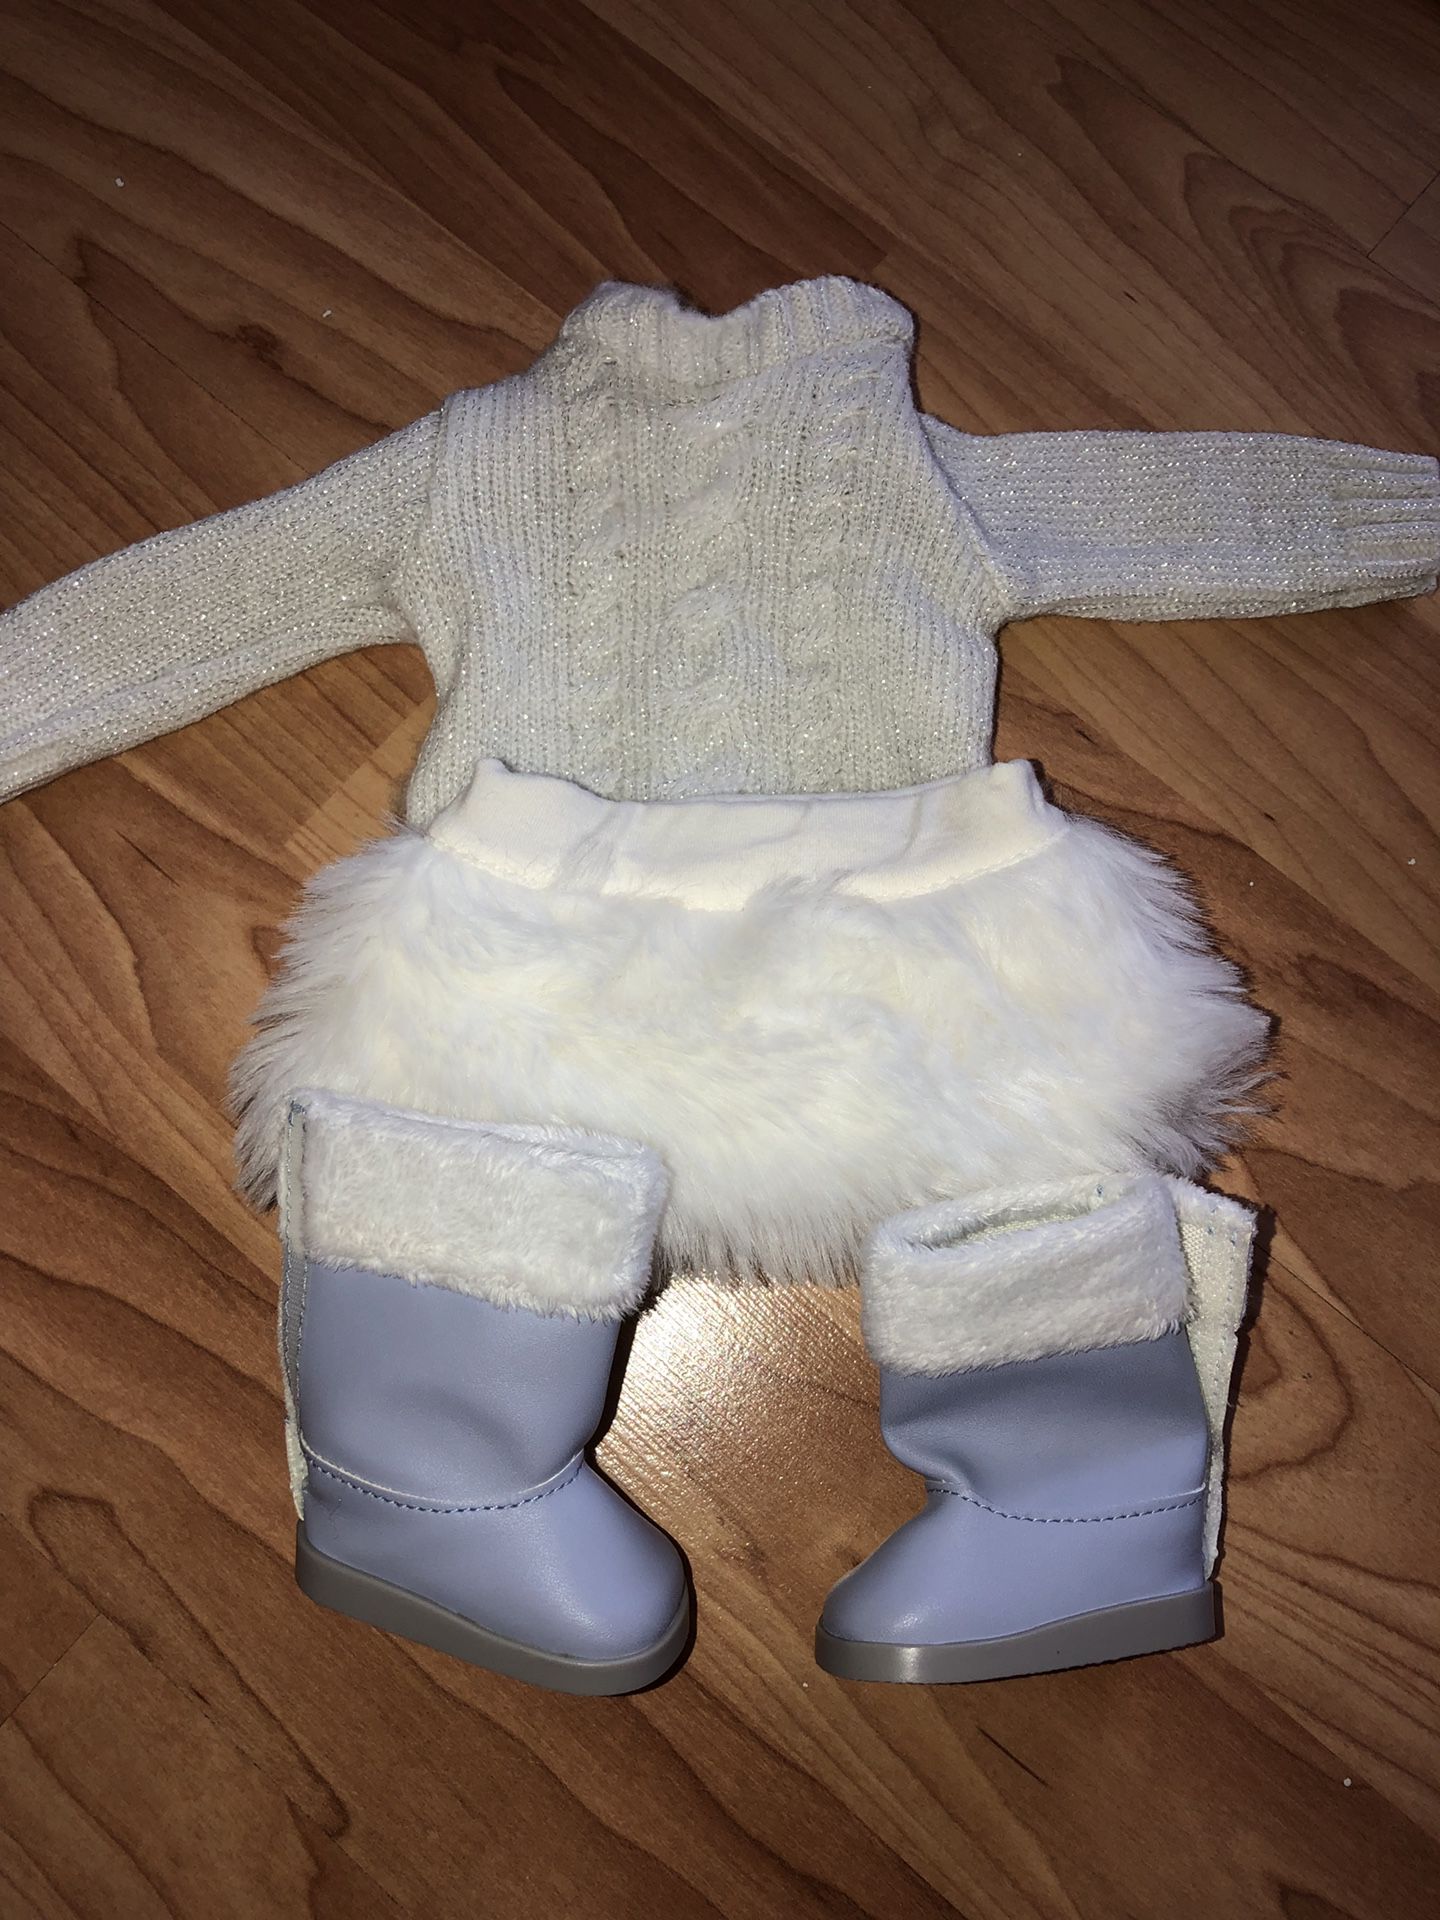 American Girl Doll Sweater, Skirt & Boots